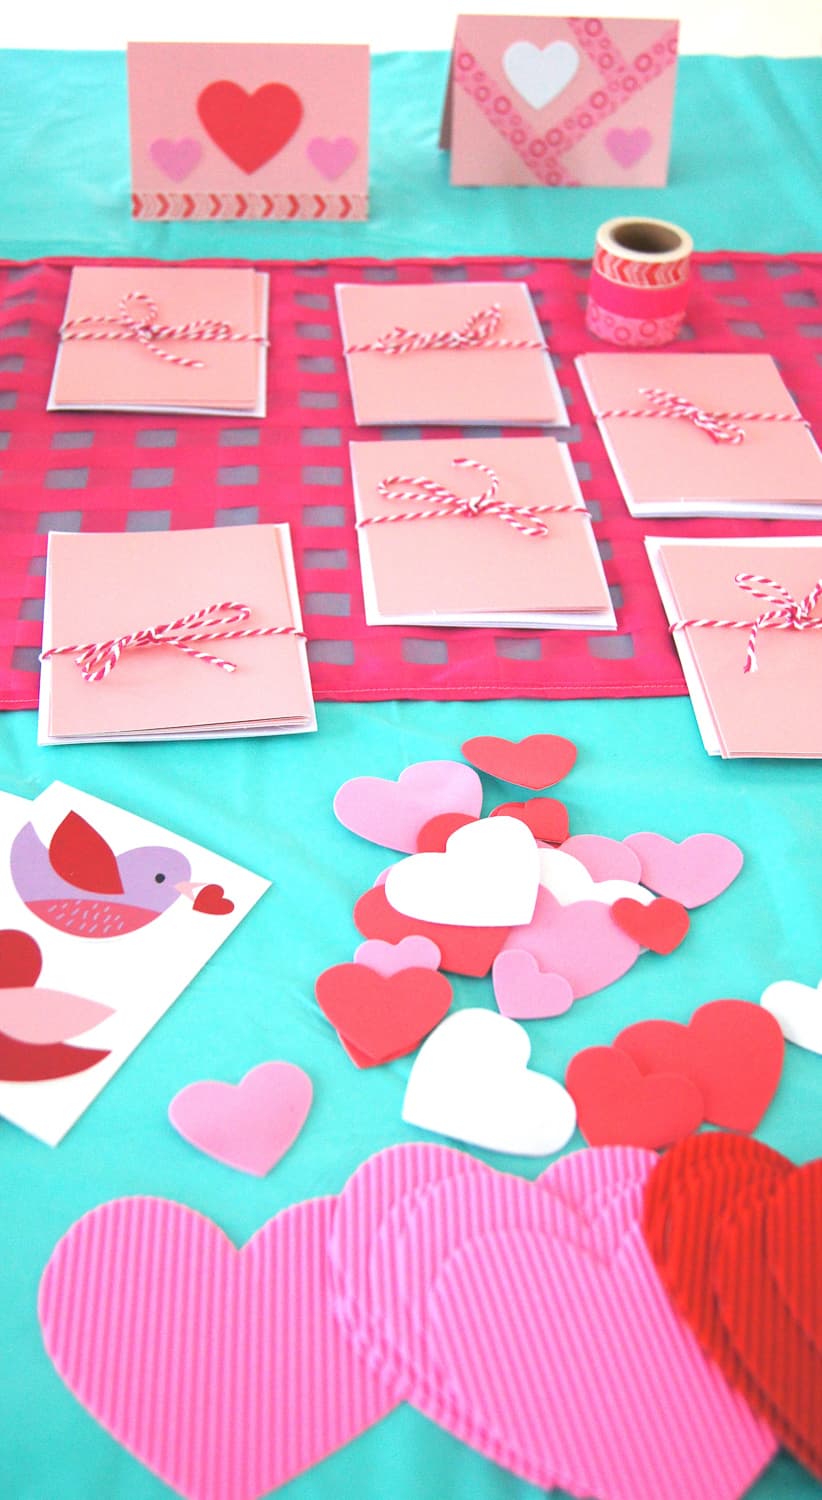 Supplies to create Valentine's Day Cards